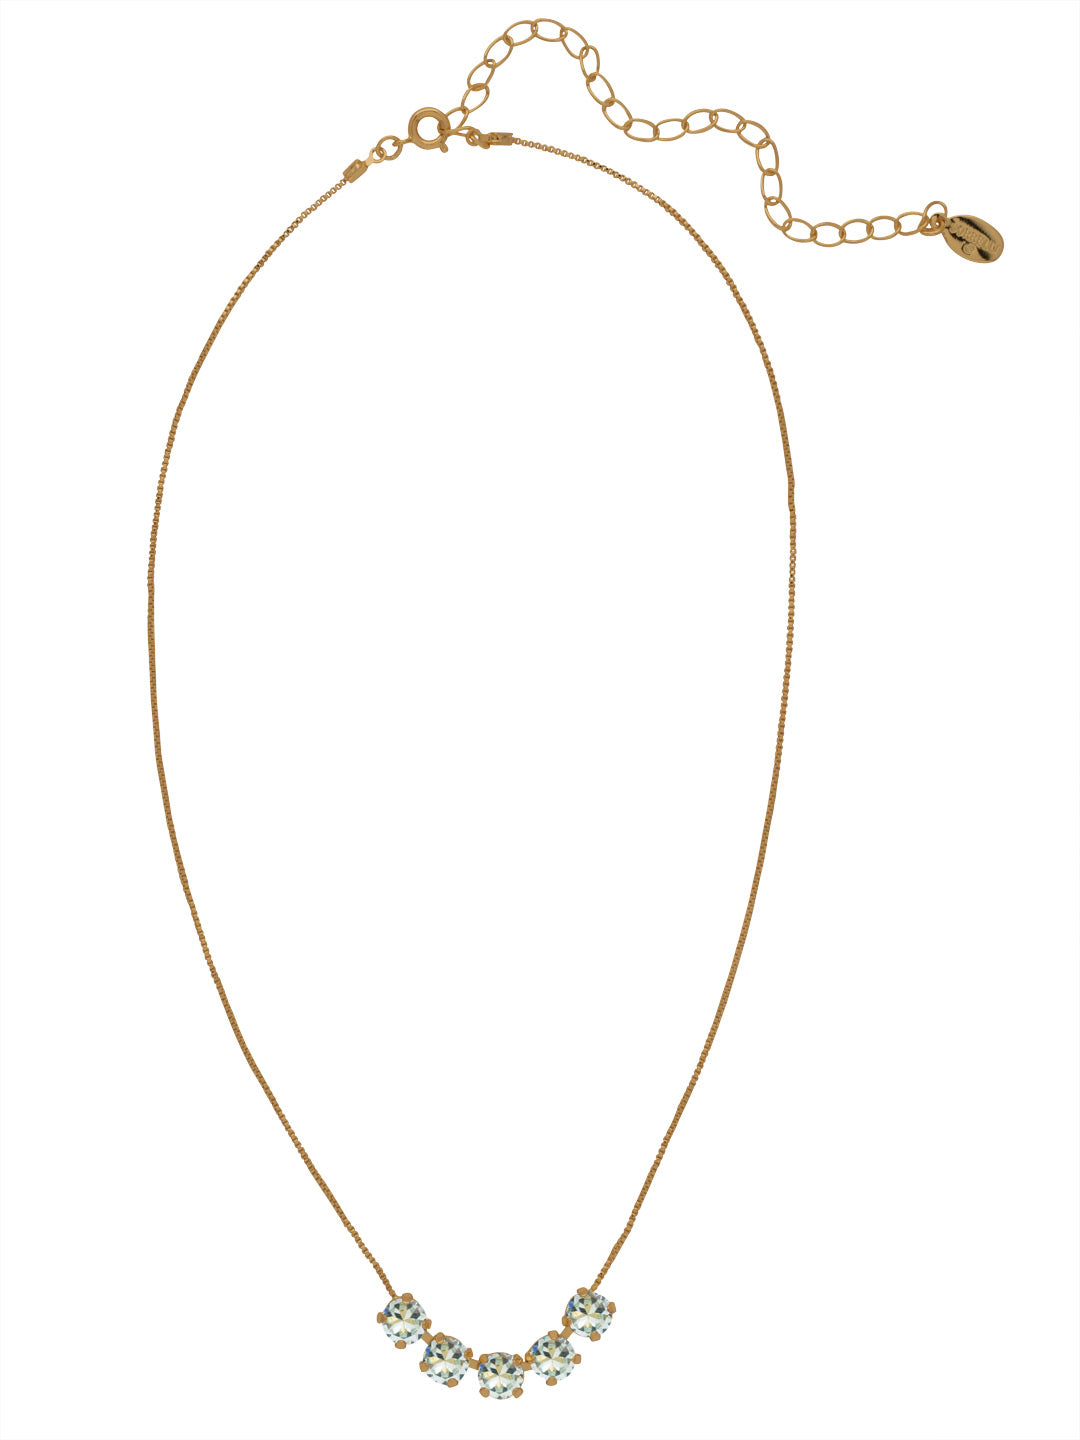 Shaughna Tennis Necklace - NFC84AGLAQ - <p>The Shaughna Tennis Necklace features five crystals on a delicate adjustable chain. From Sorrelli's Light Aqua collection in our Antique Gold-tone finish.</p>